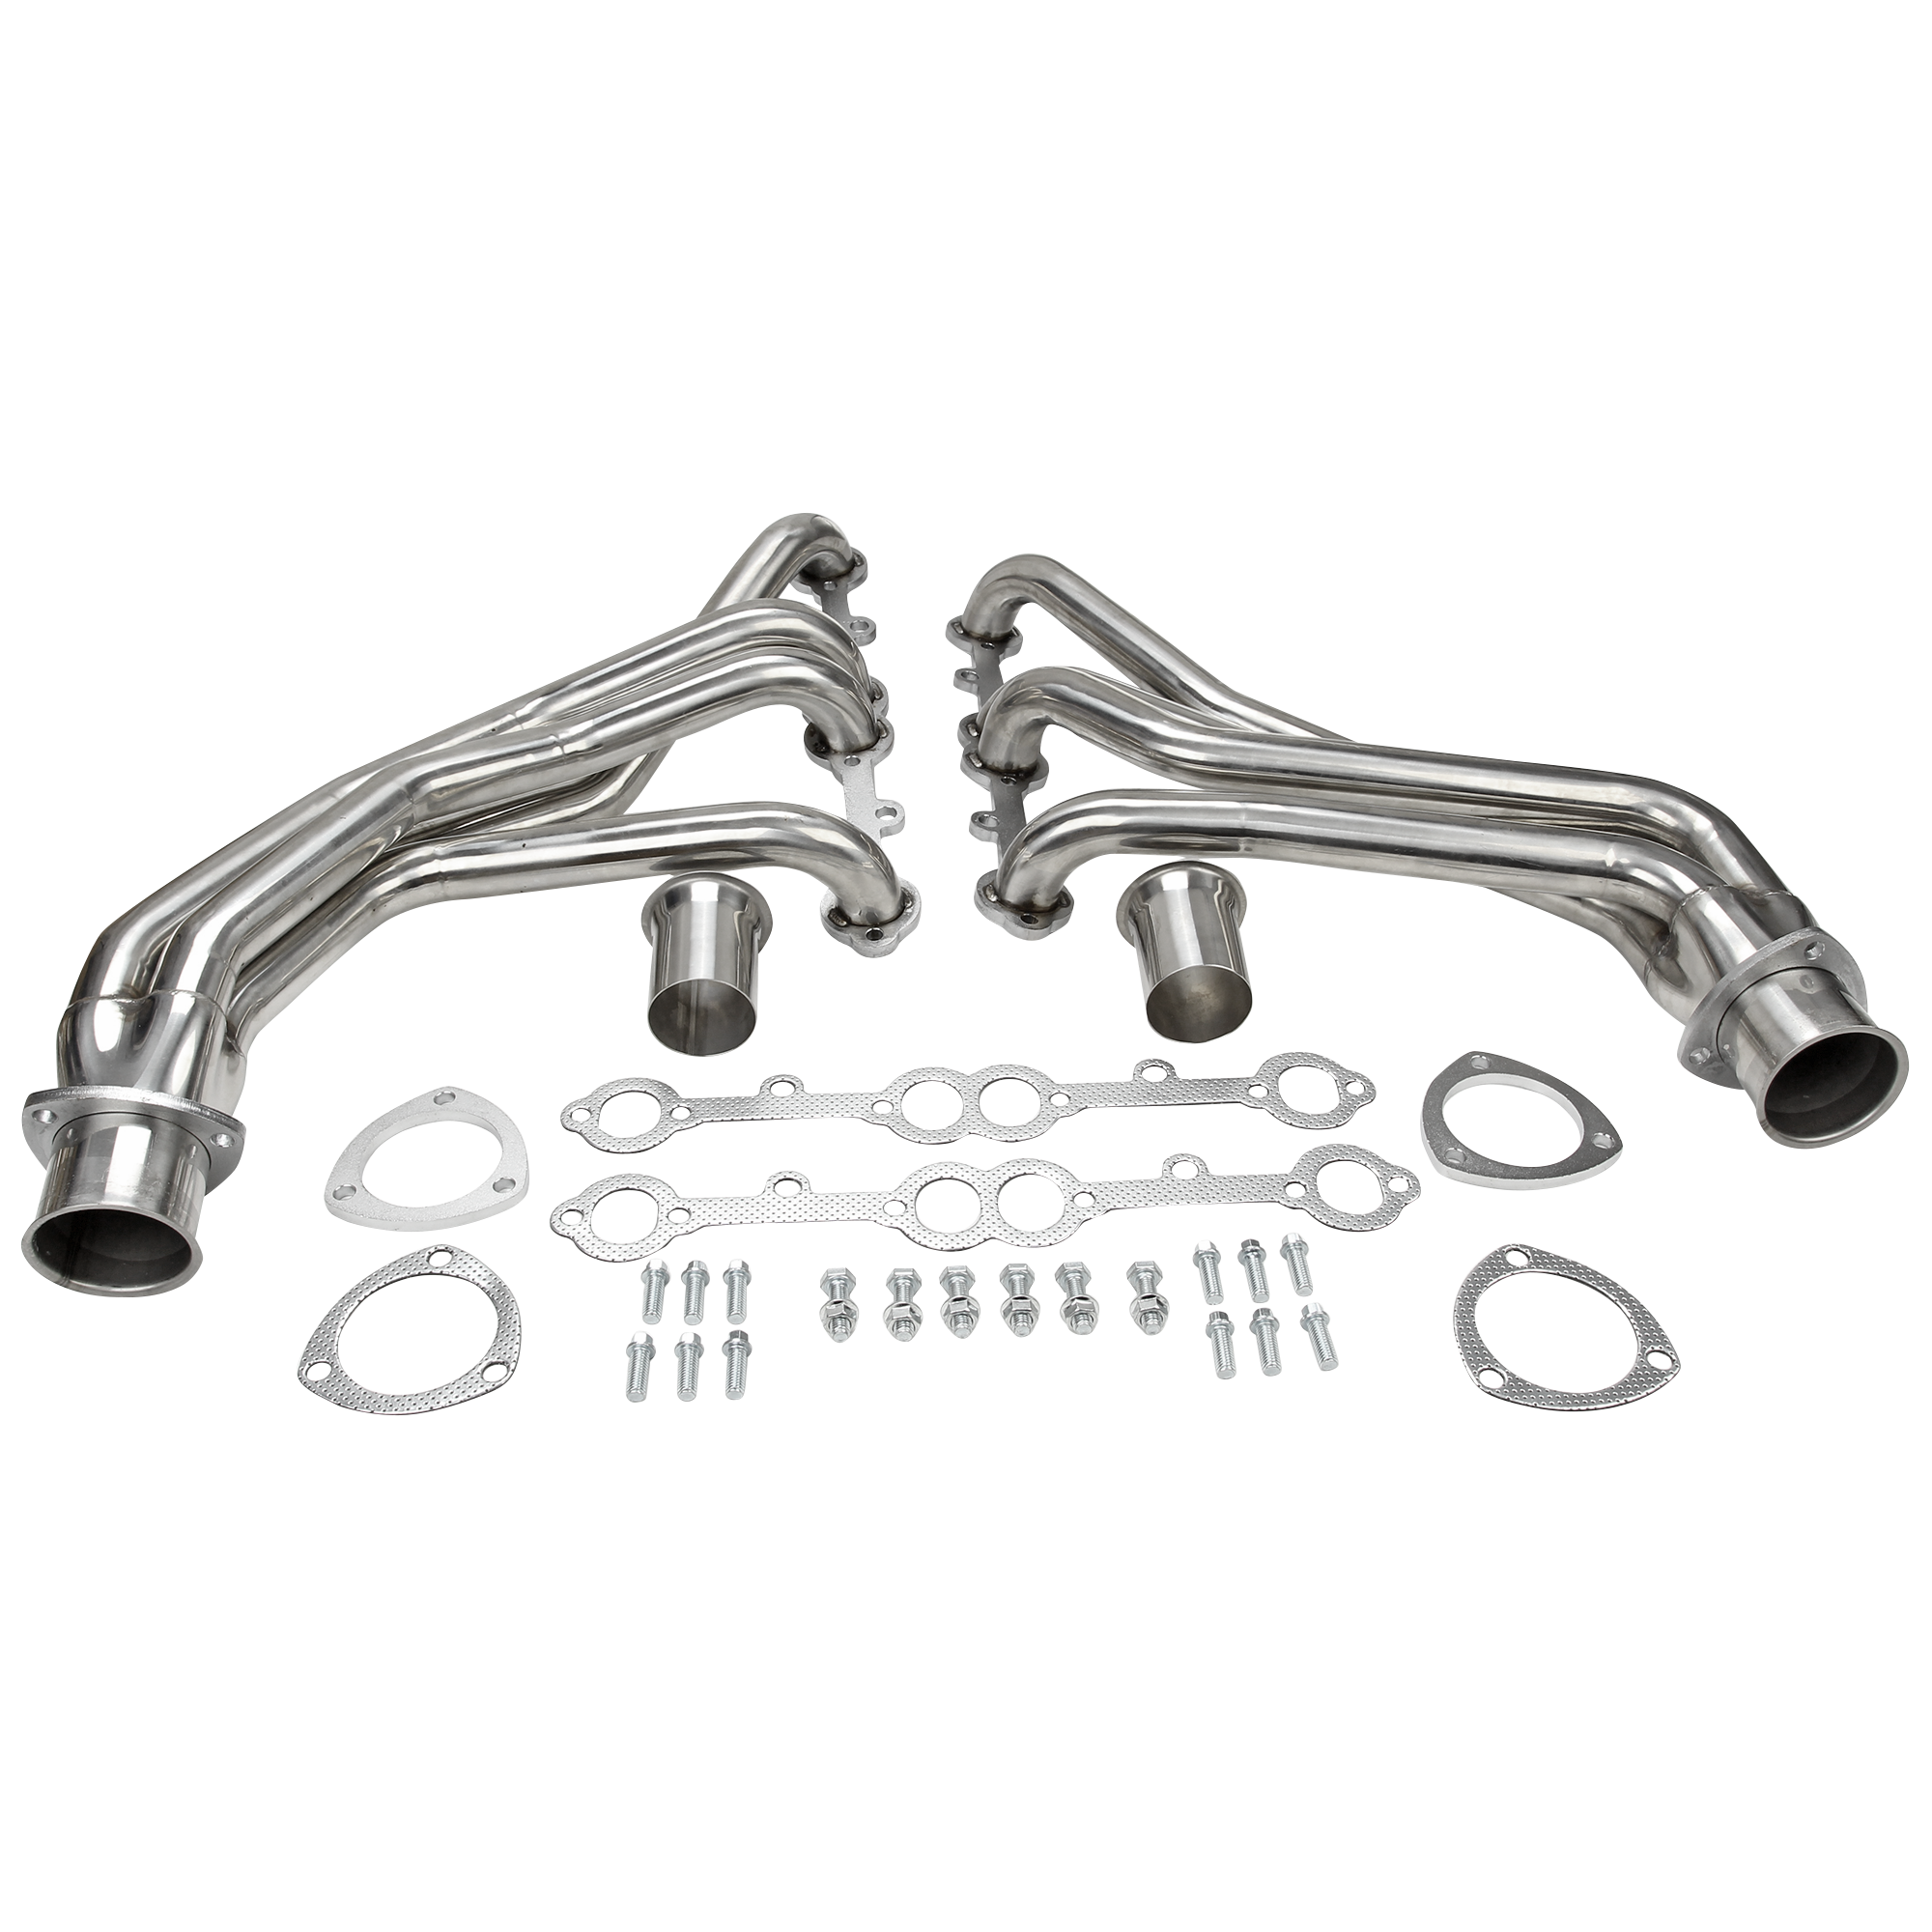 Stainless Steel Exhaust Manifold Headers for Chevy 283/302/305/307/327/350/400 Small Block V8 Engine